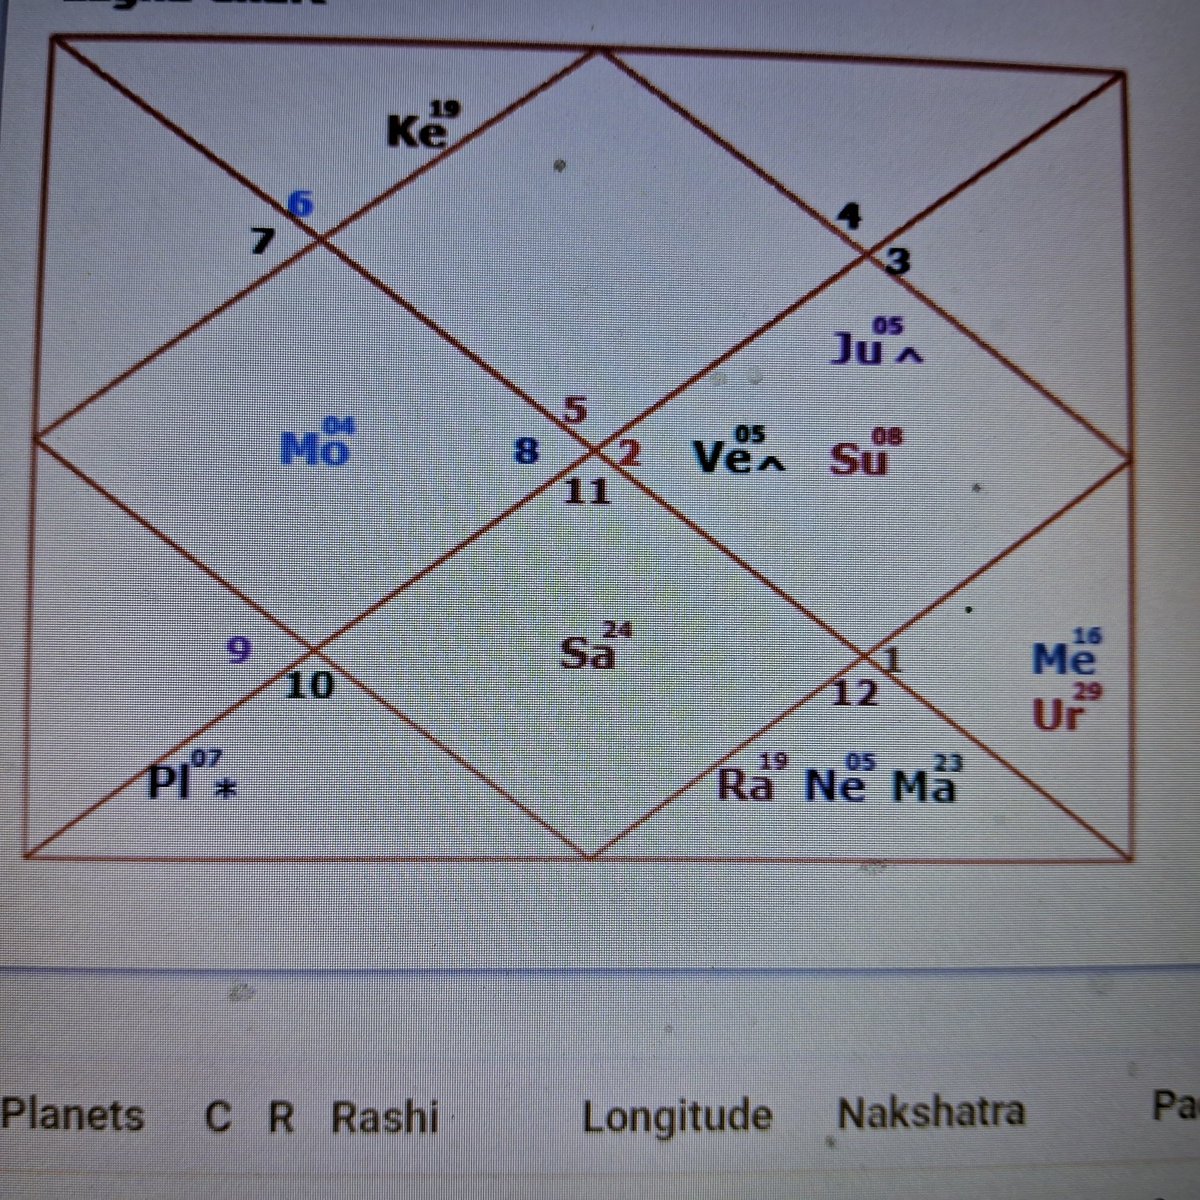 #Nifty #Banknifty #Niftyfuture #CnxIT #Bankniftyfut
#Niftymetal 
Even in below Today's horoscope 
We have debilated Chandra in 4th house 

4th lord afflicted in 8 th house 
Expecting war threats,big accidents, earthquake, blasts like negative news coming within 15 days